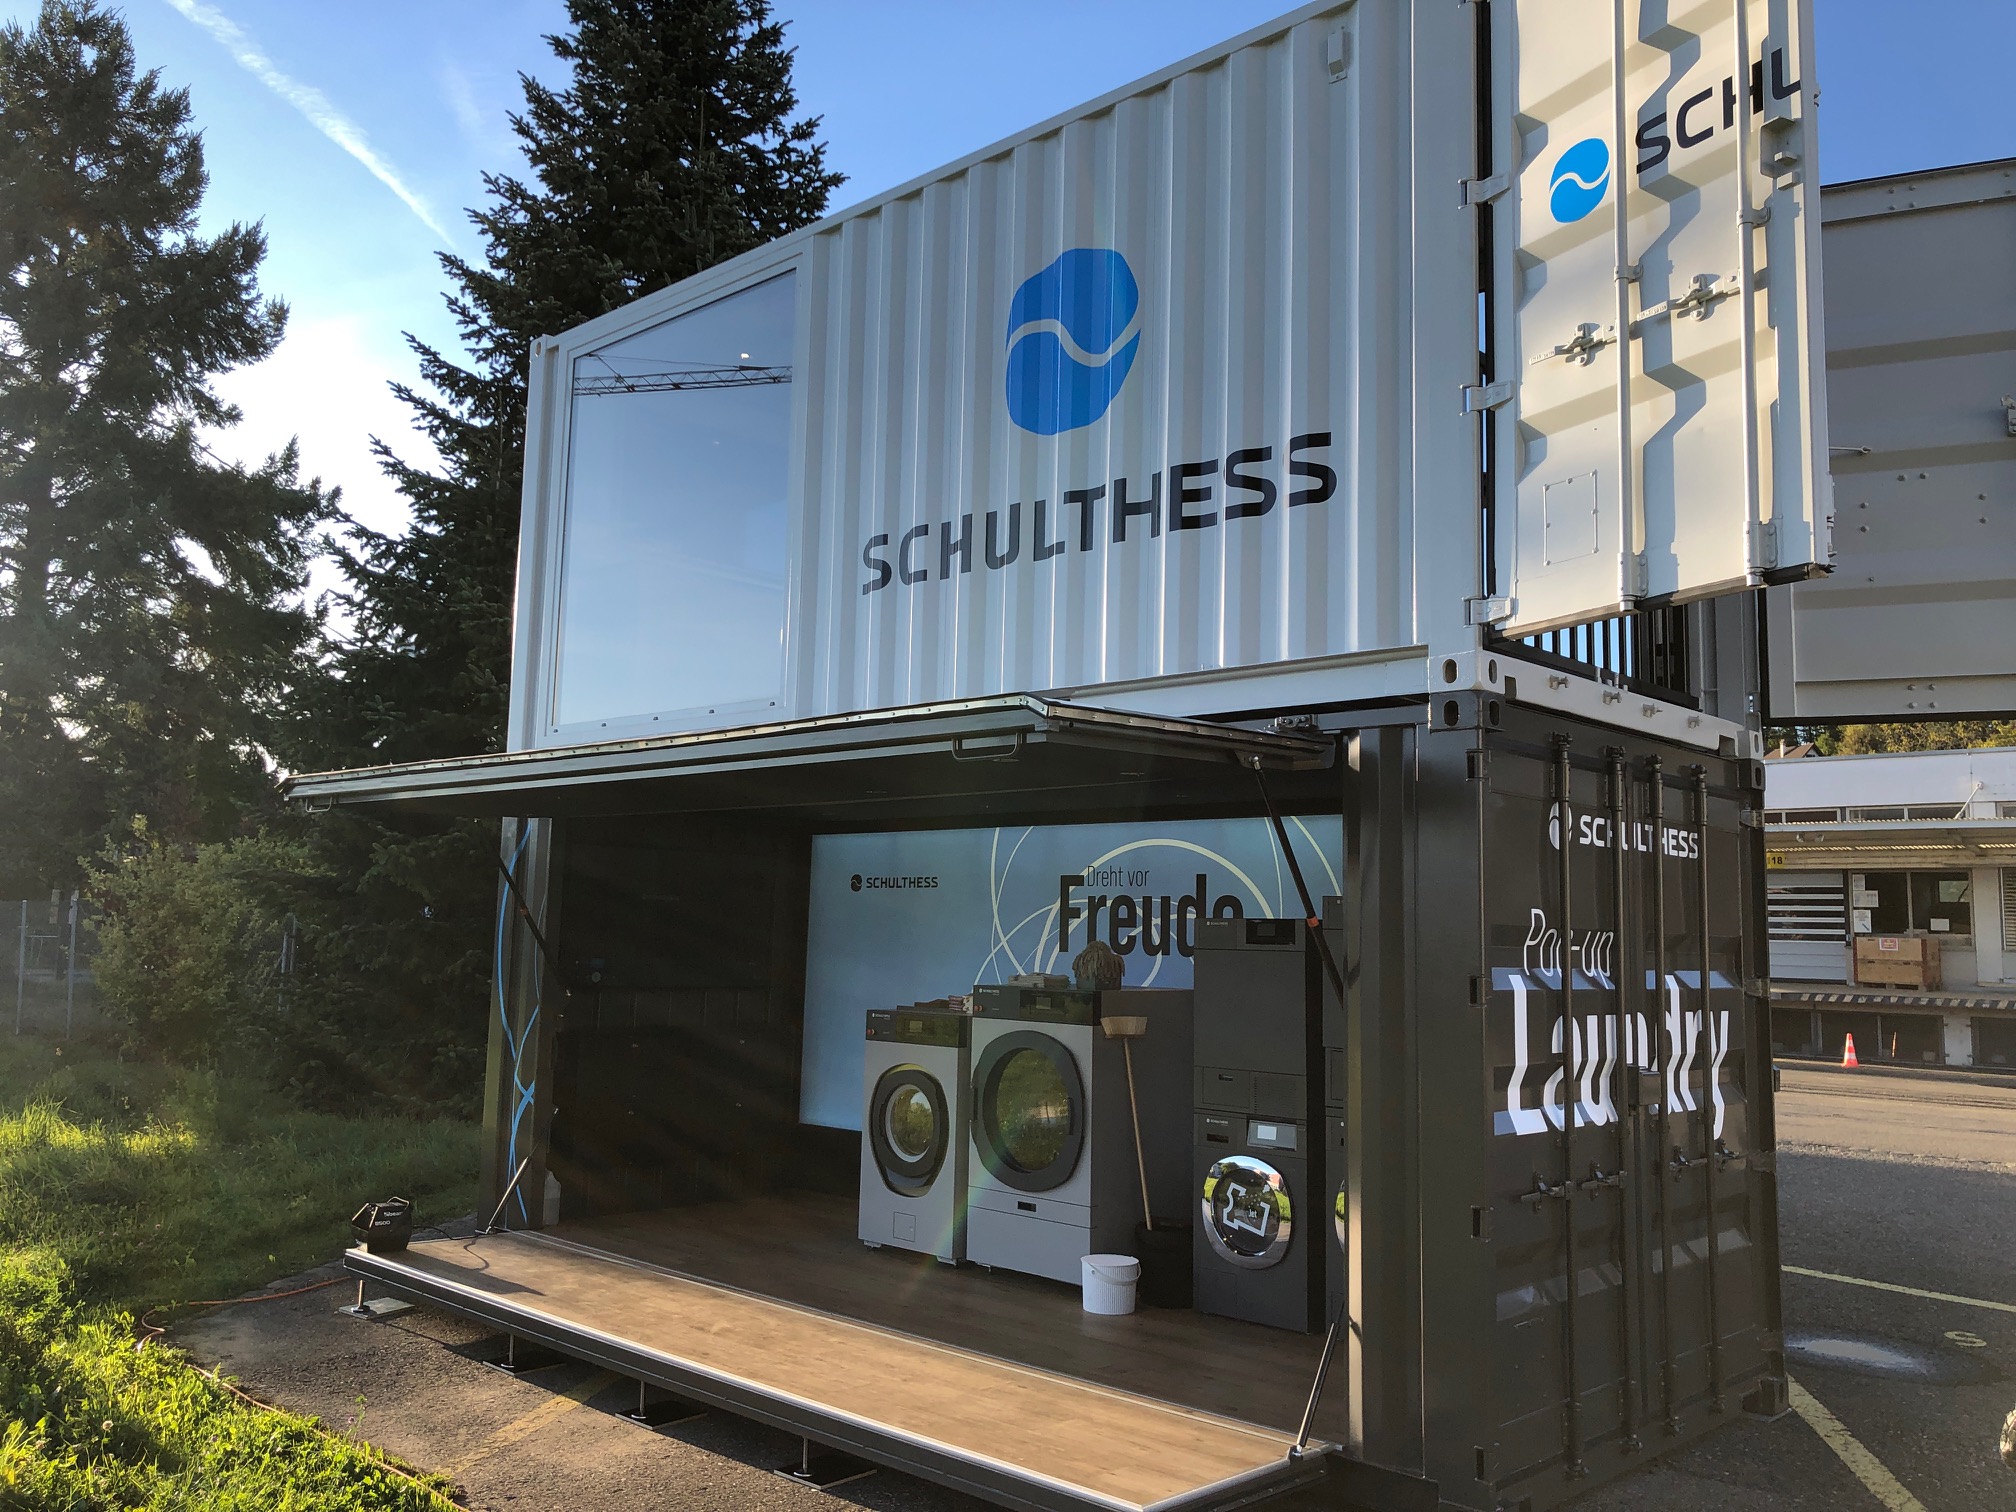 Schulthess Laundry Pop-up